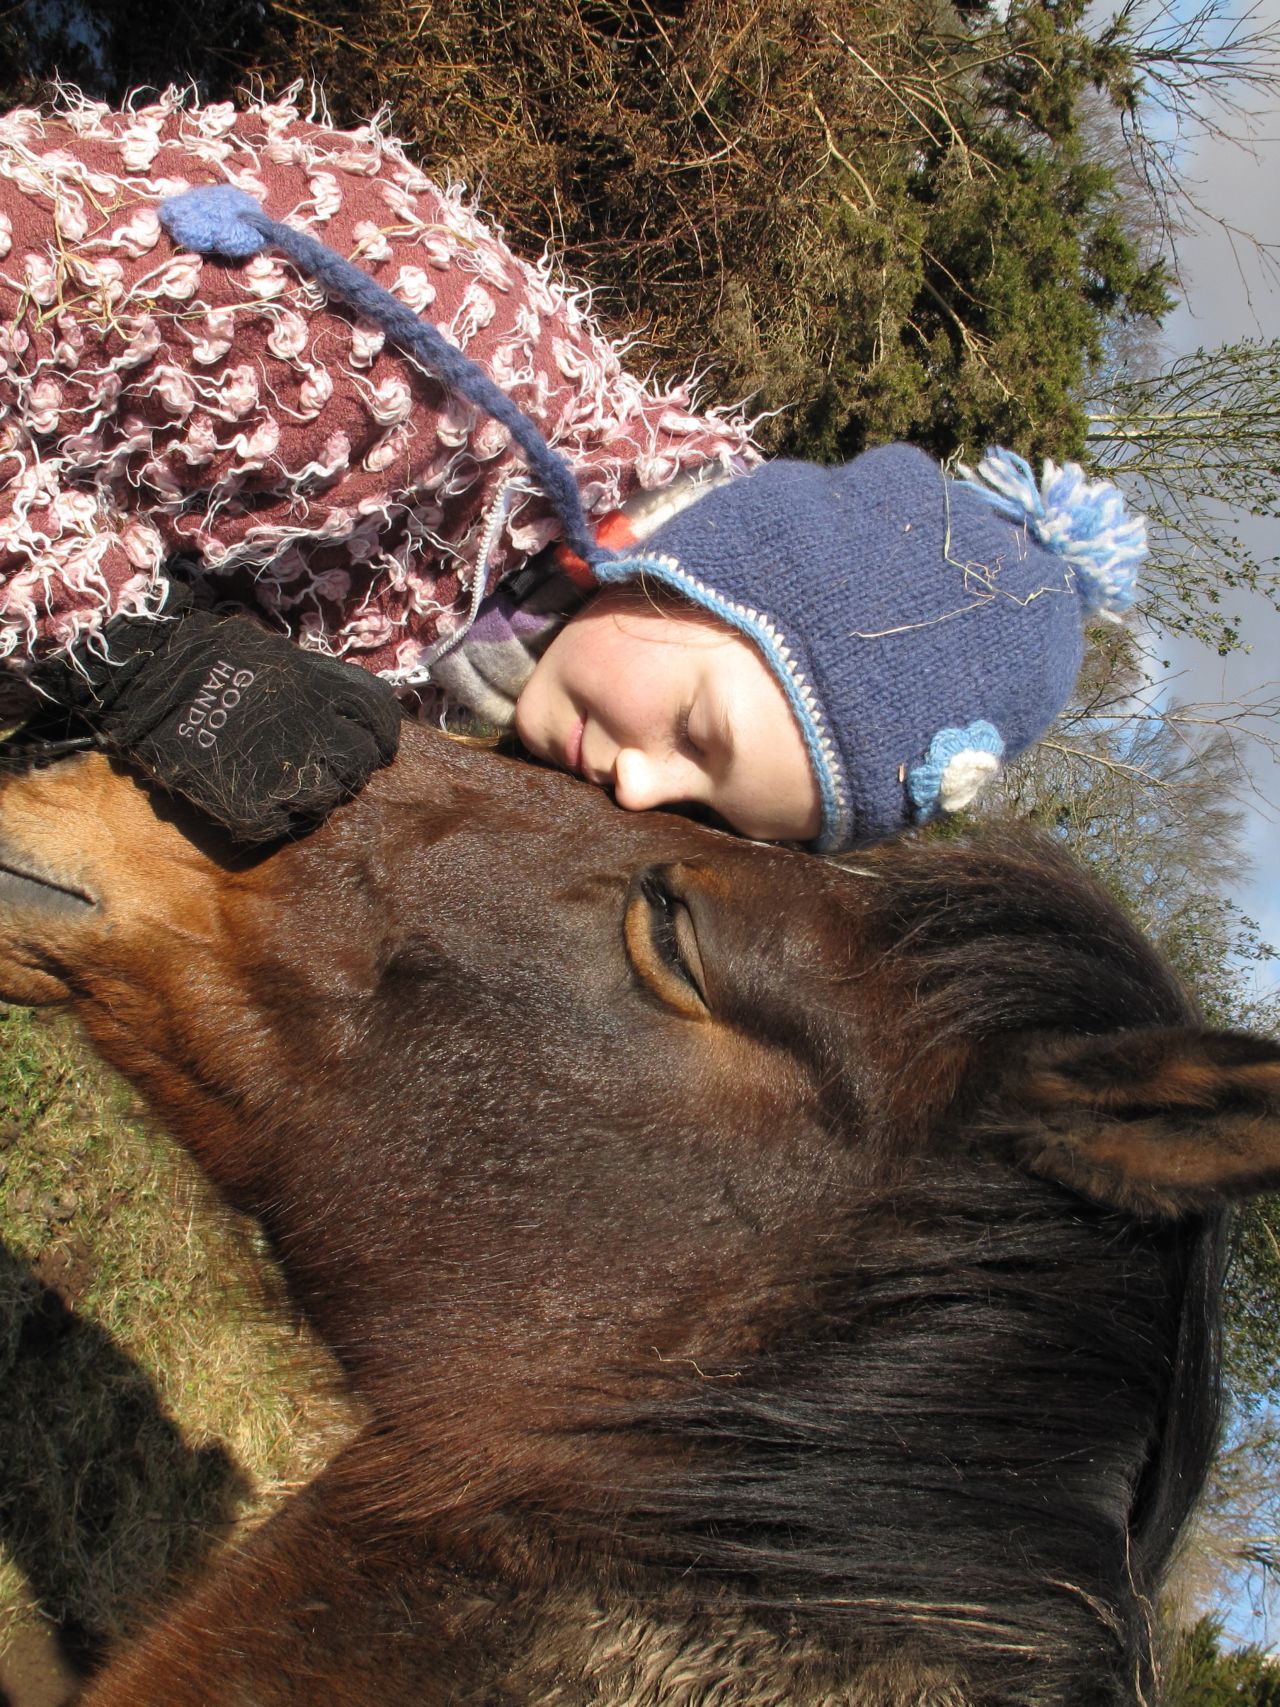 A youngster at Sirona Therapeutic Horsemanship in Devon shares a special moment with one of the clinic's five horses. Equine therapy may help people suffering from depression, bipolar disorder, phobias, anger issues and trauma.